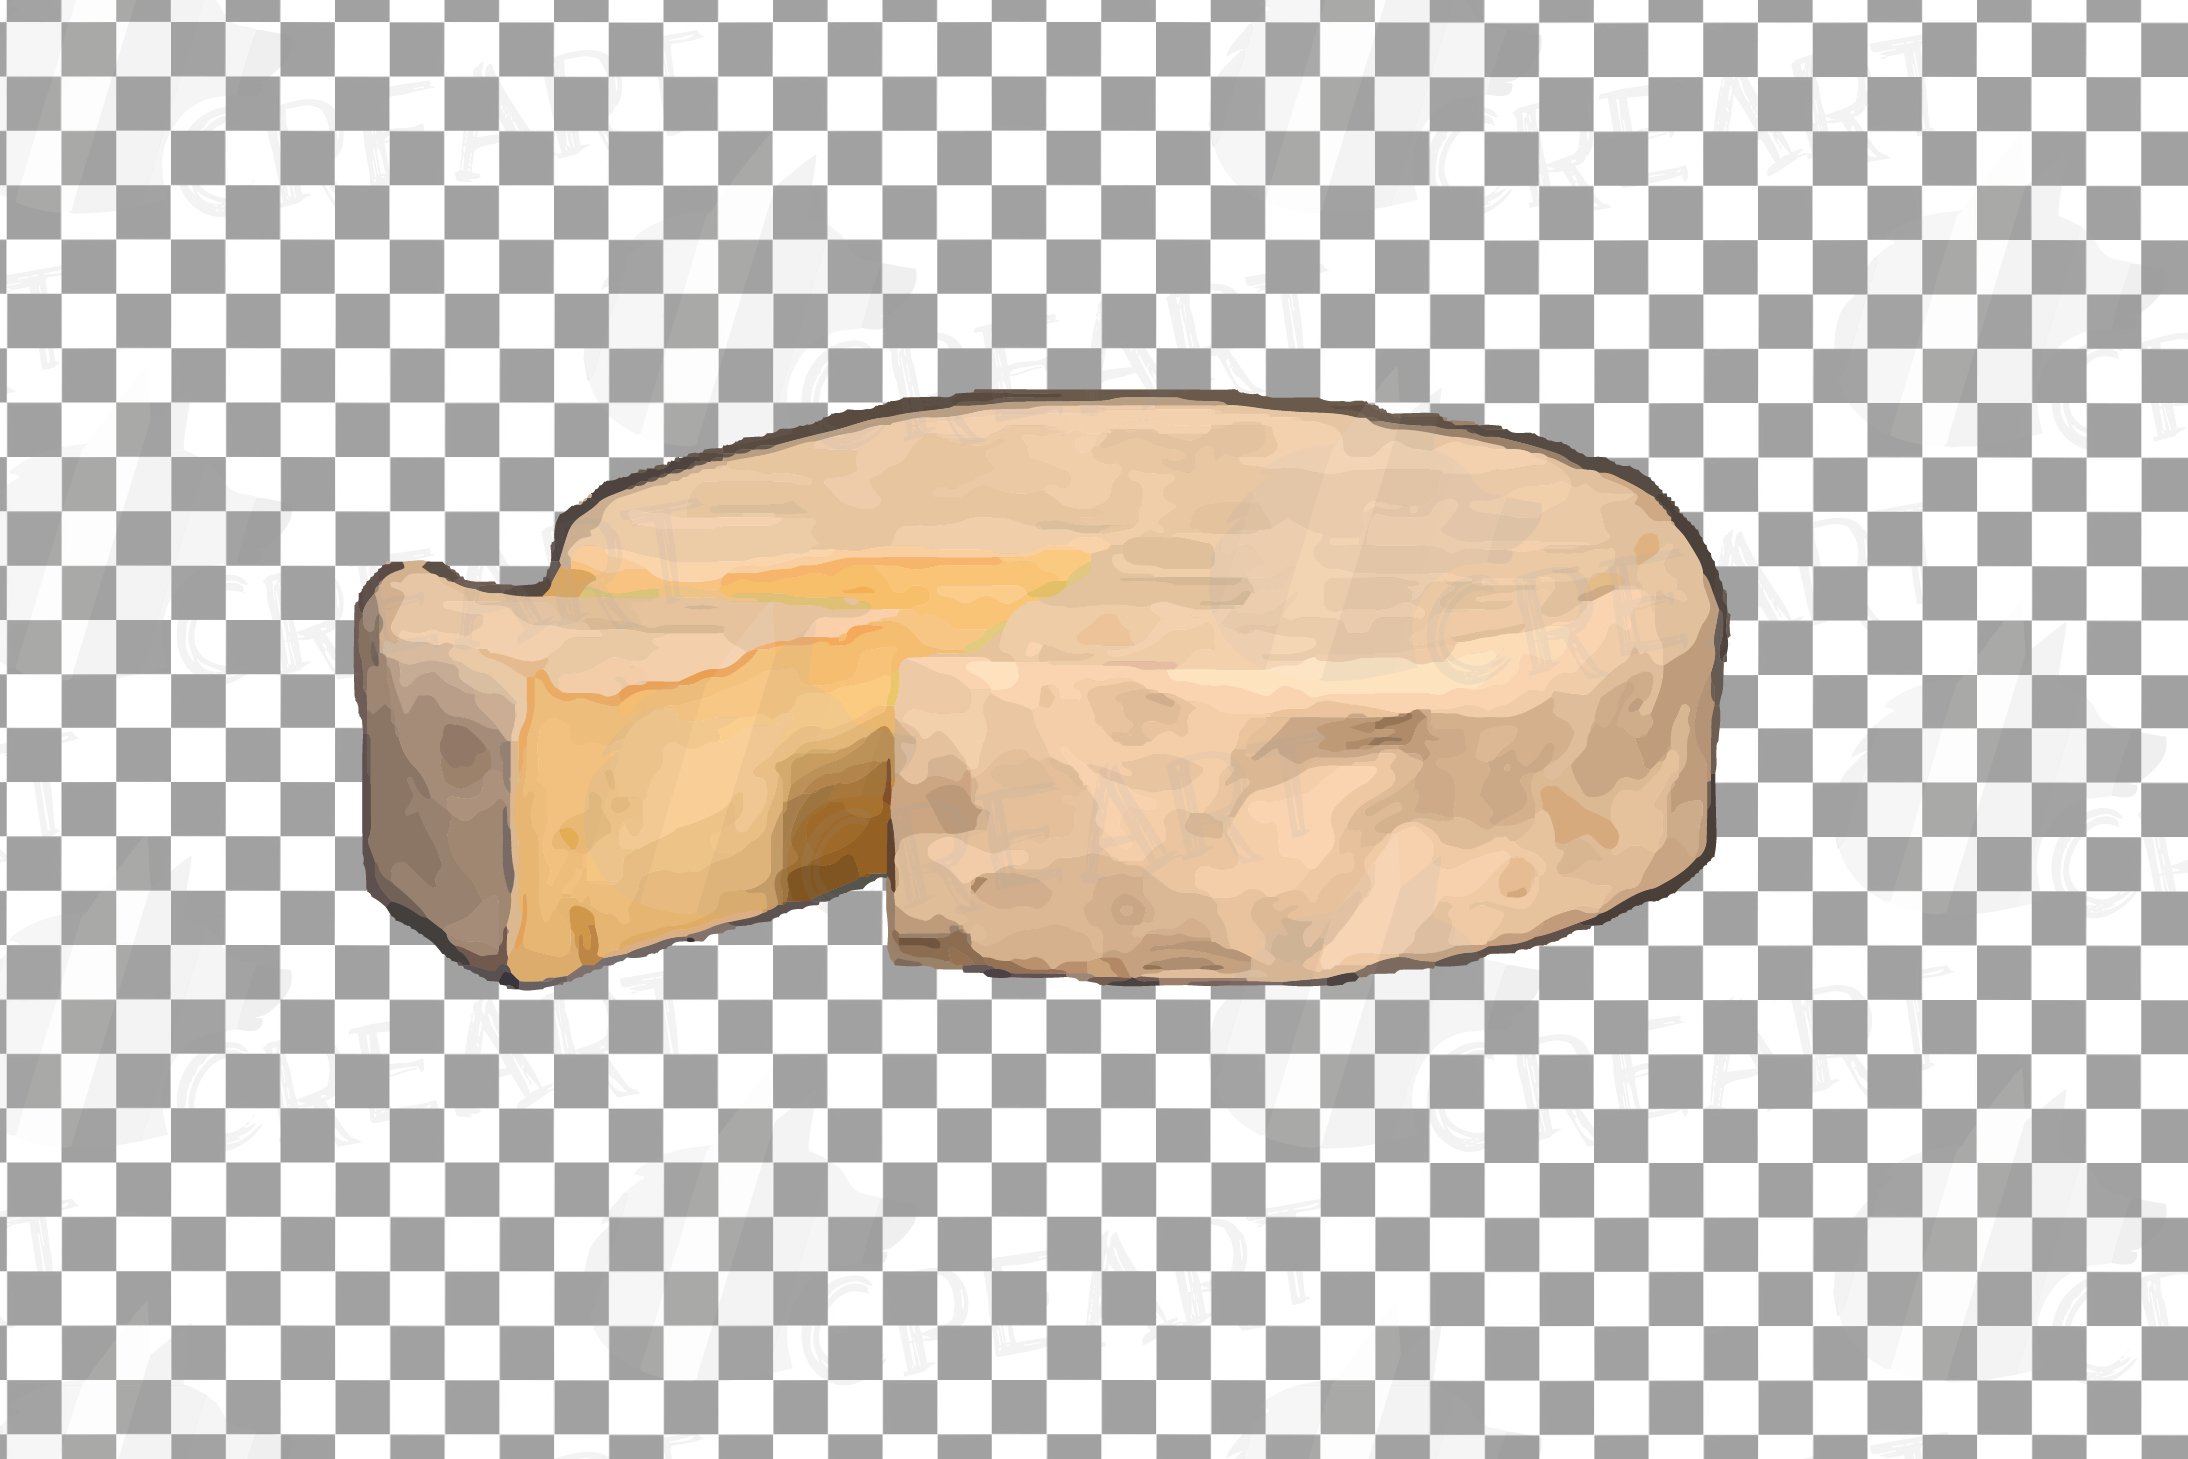 Charming image of hard cheese on a transparent background.